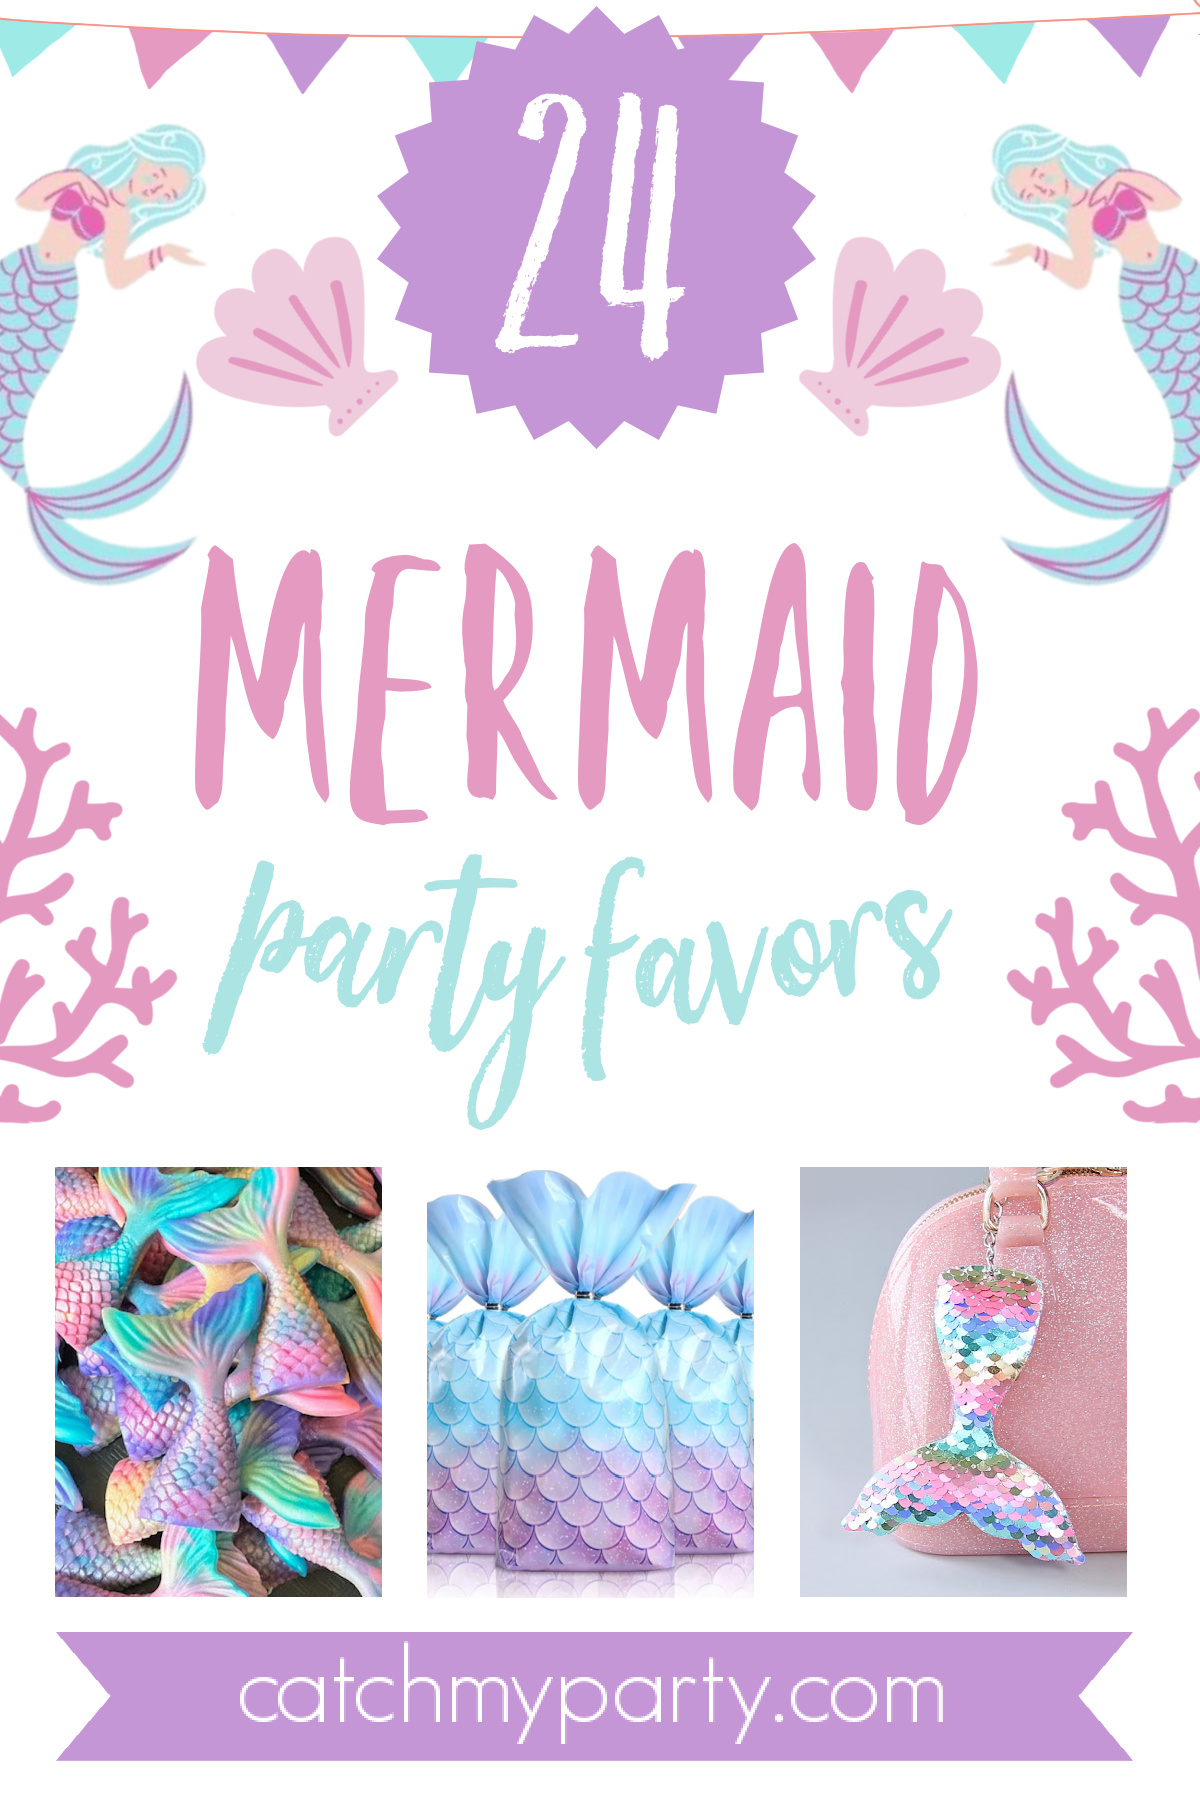 Don't Miss these 24 Stunning Mermaid Party Favors!